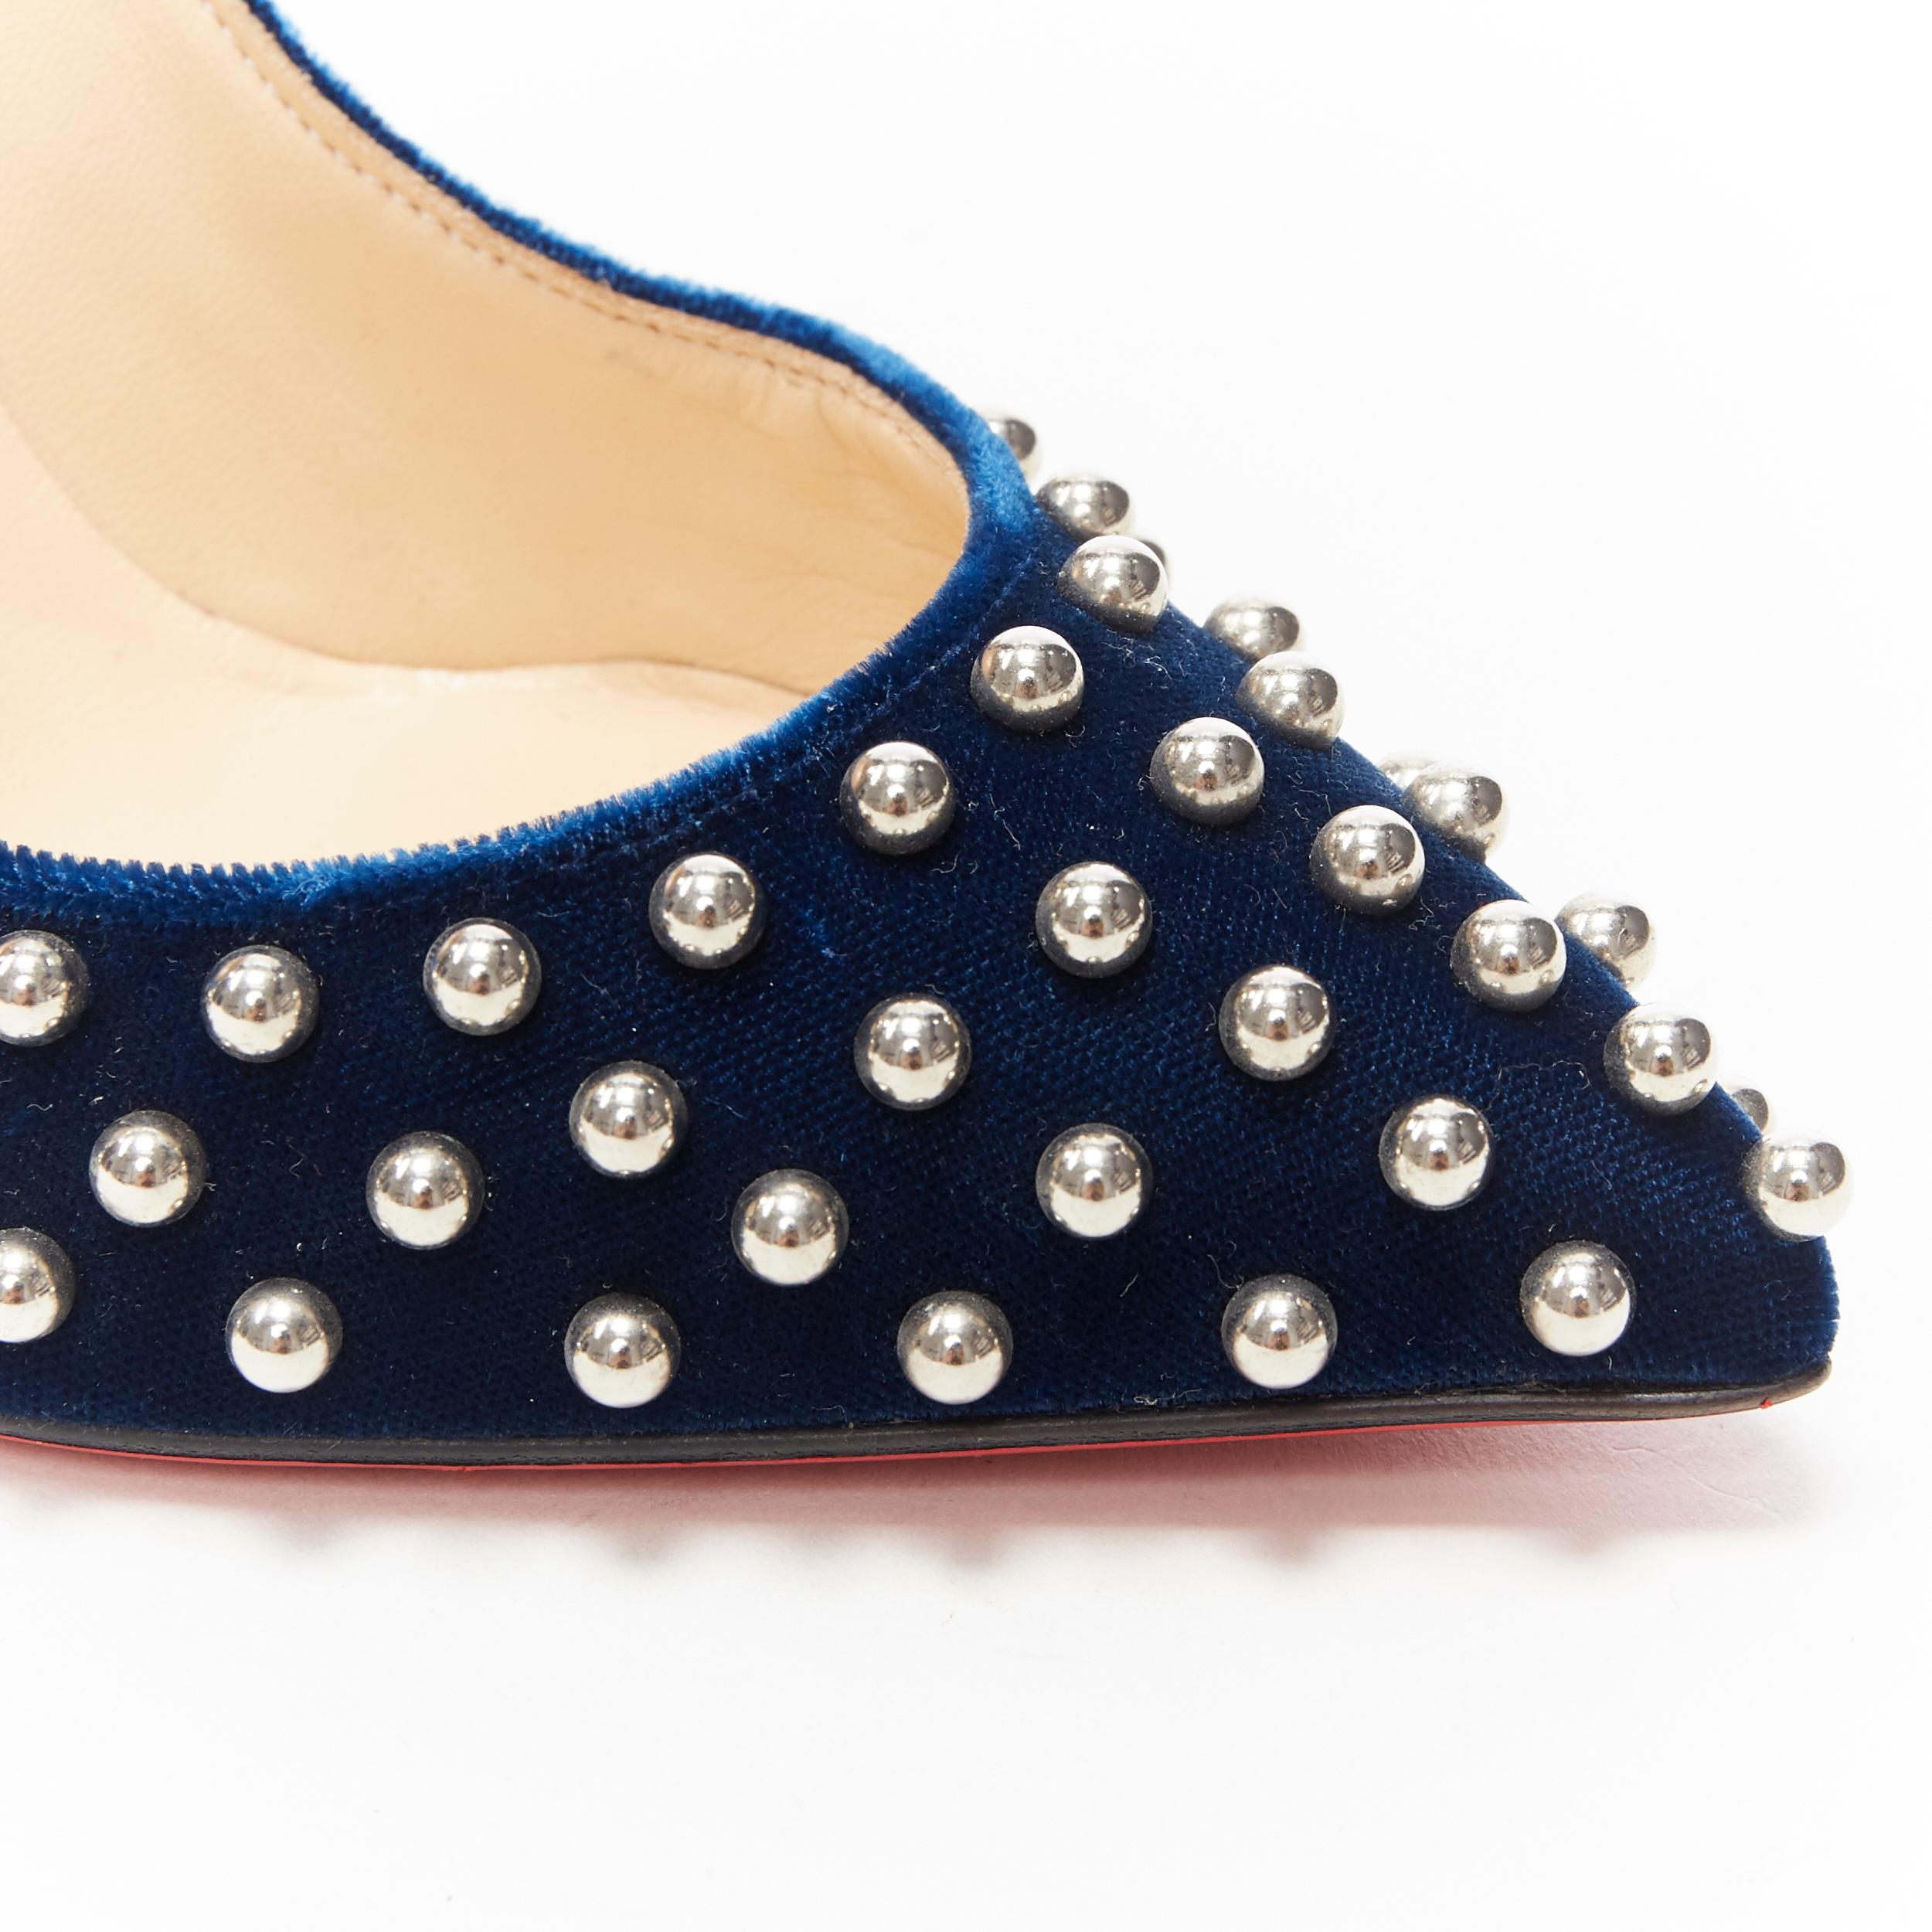 CHRISTIAN LOUBOUTIN Billy 110 blue velvet silver all-over stud pump EU36.5
Brand: Christian Louboutin
Designer: Christian Louboutin
Model Name / Style: Billy 110
Material: Velvet
Color: Blue and silver
Pattern: Solid
Lining material: Leather
Extra